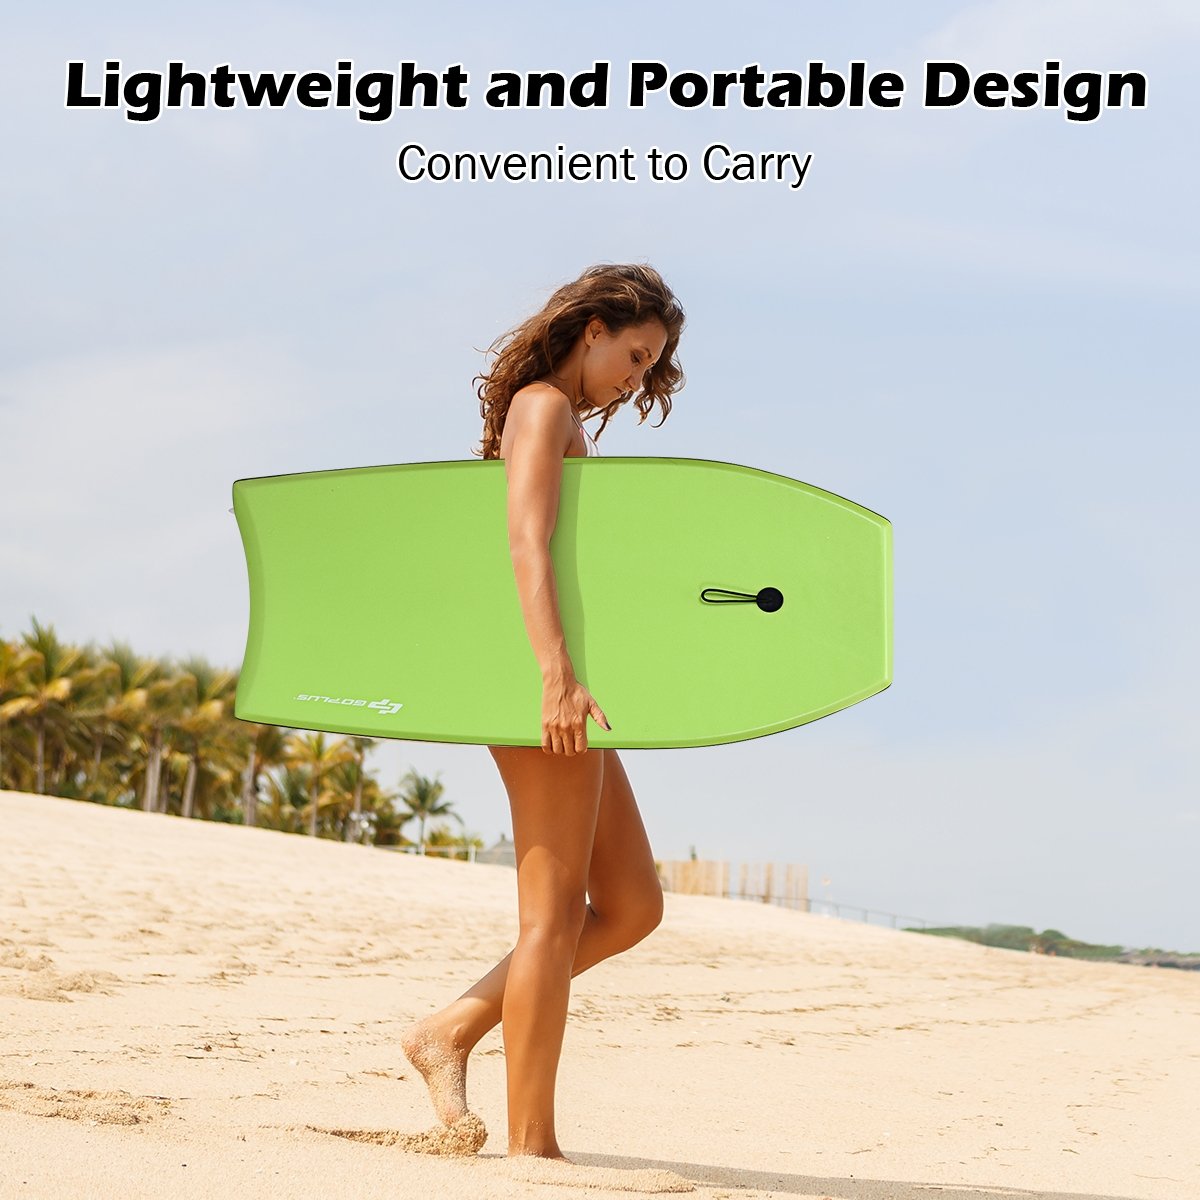 Super Surfing  Lightweight Bodyboard with Leash-M, Green at Gallery Canada